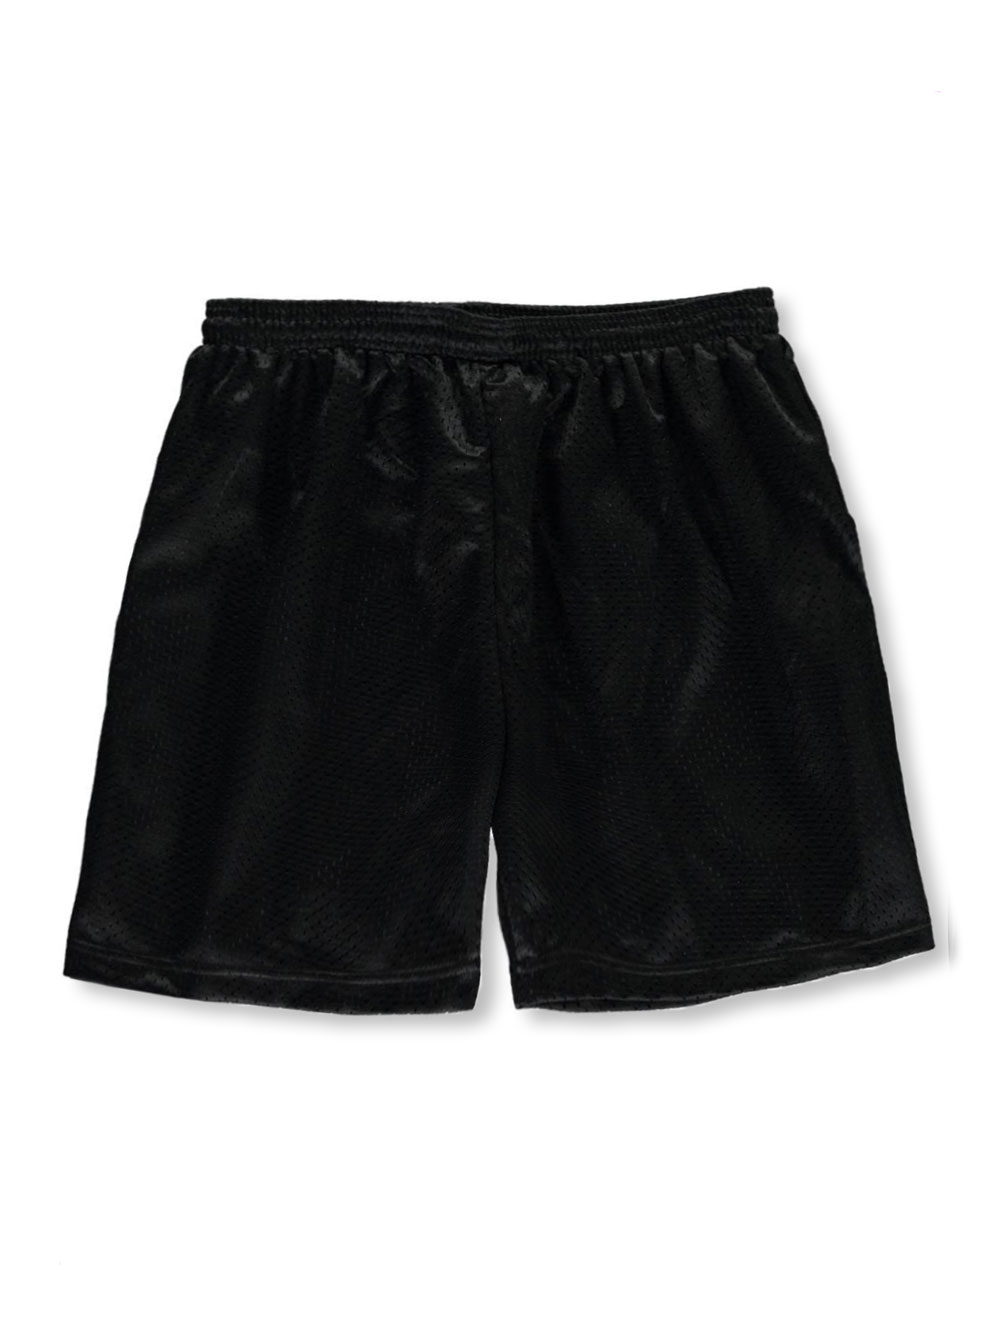 Size Xl Shorts for Boys